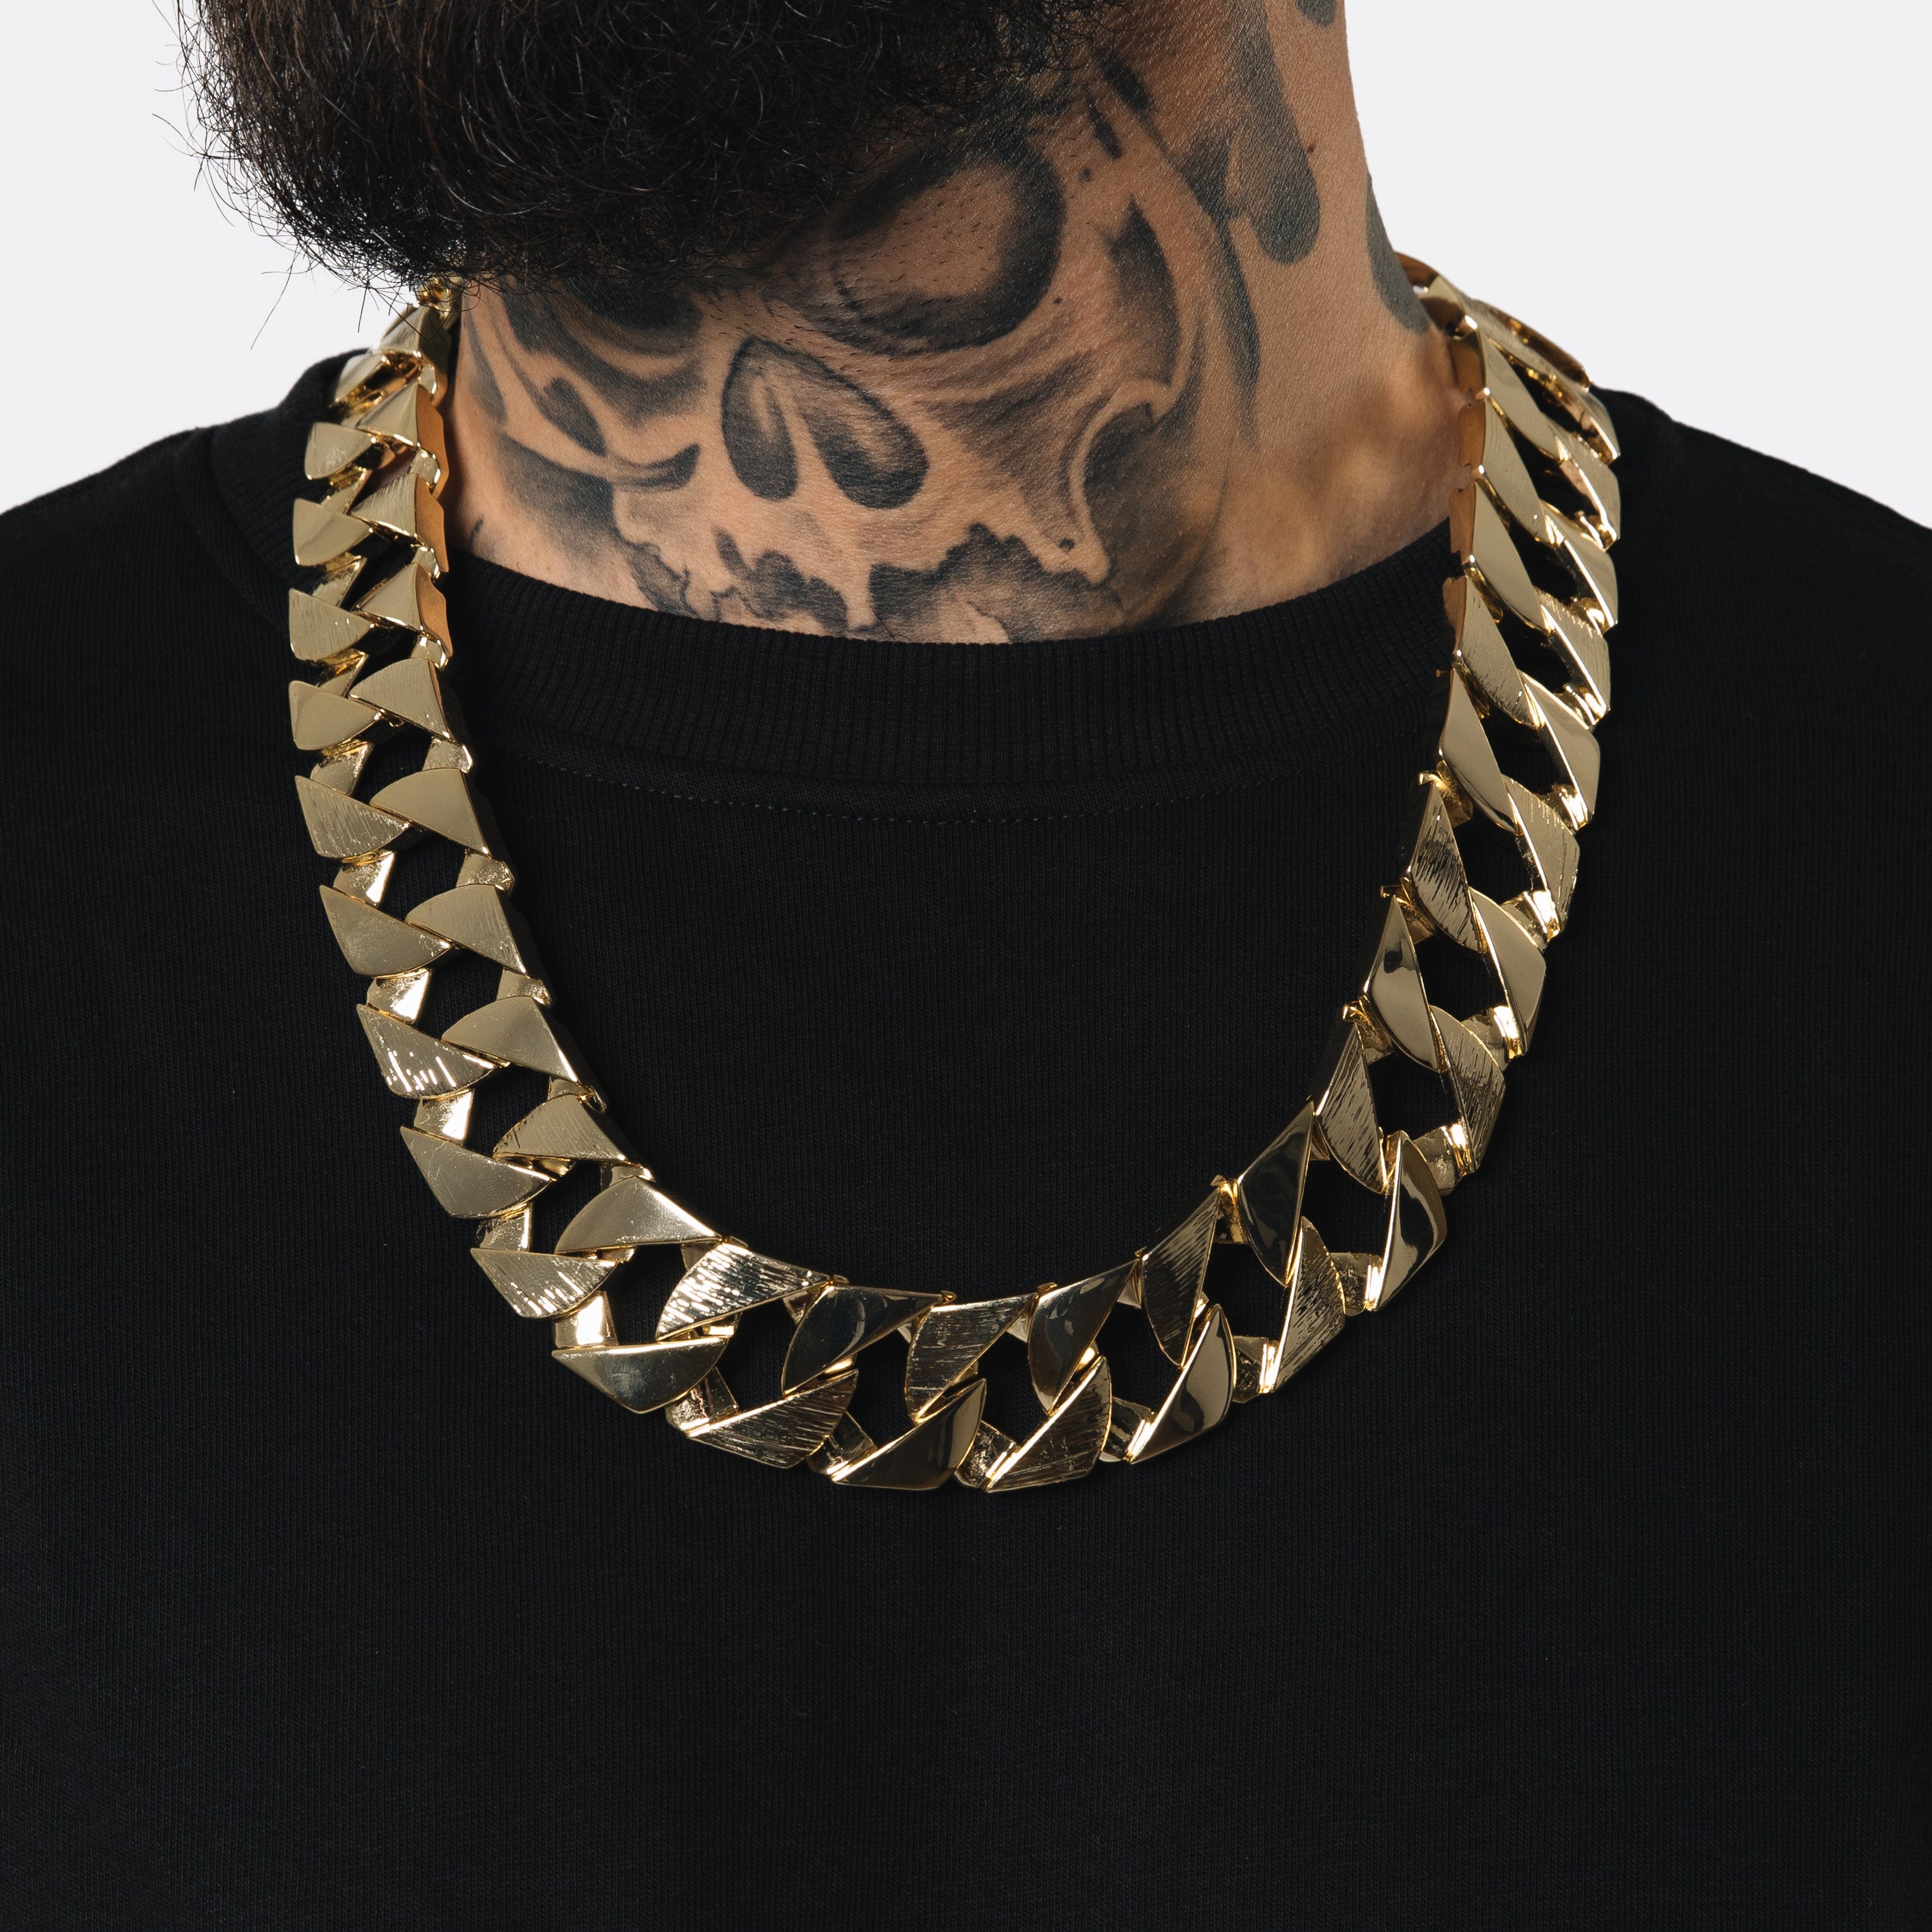 Gold Dipped Chains 26 inches / 18K Gold Chaps Chain 26mm - Gold